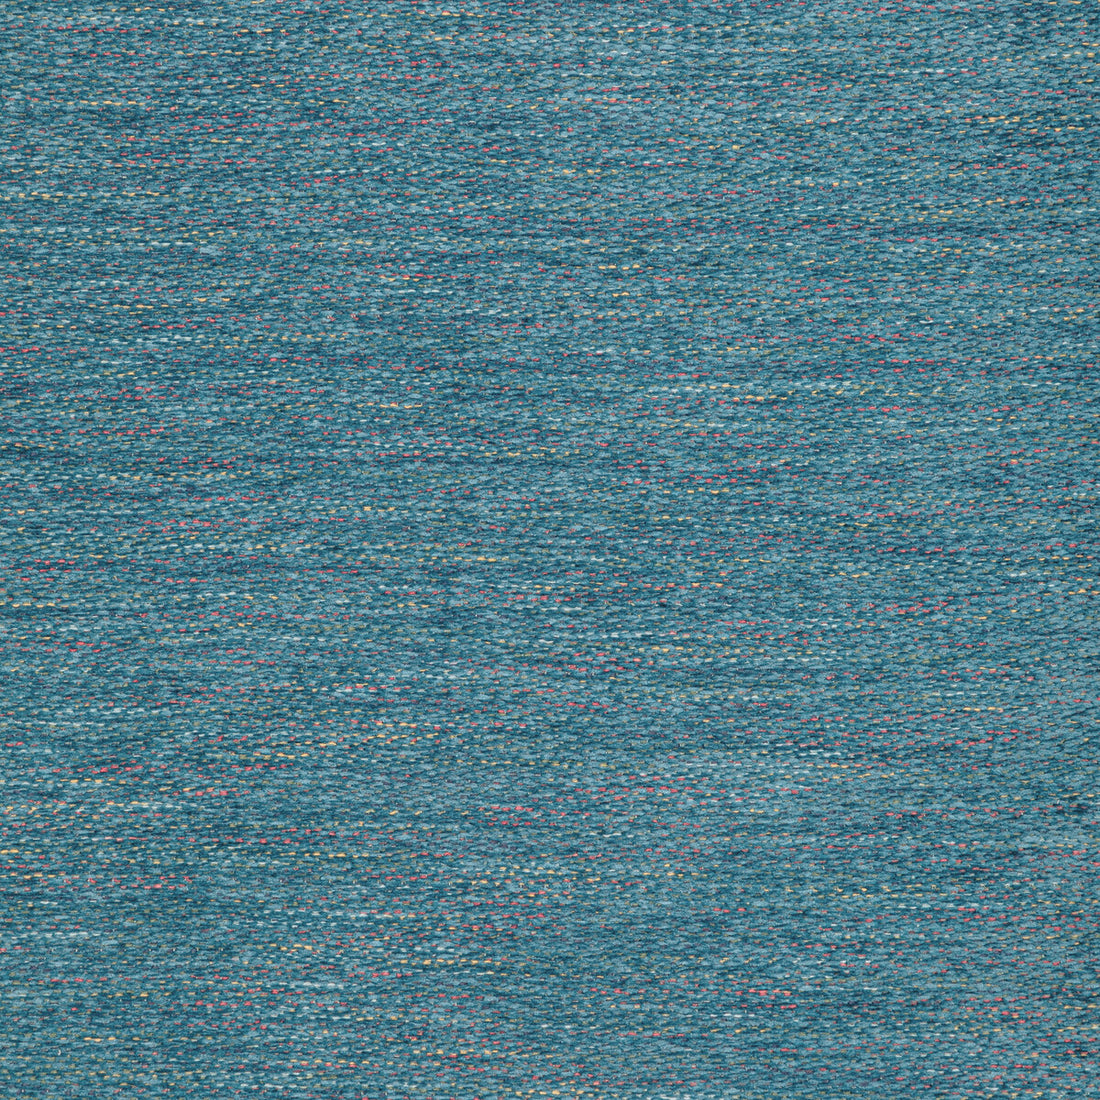 Roberty Texture fabric in teal color - pattern 8022127.13.0 - by Brunschwig &amp; Fils in the Chambery Textures III collection